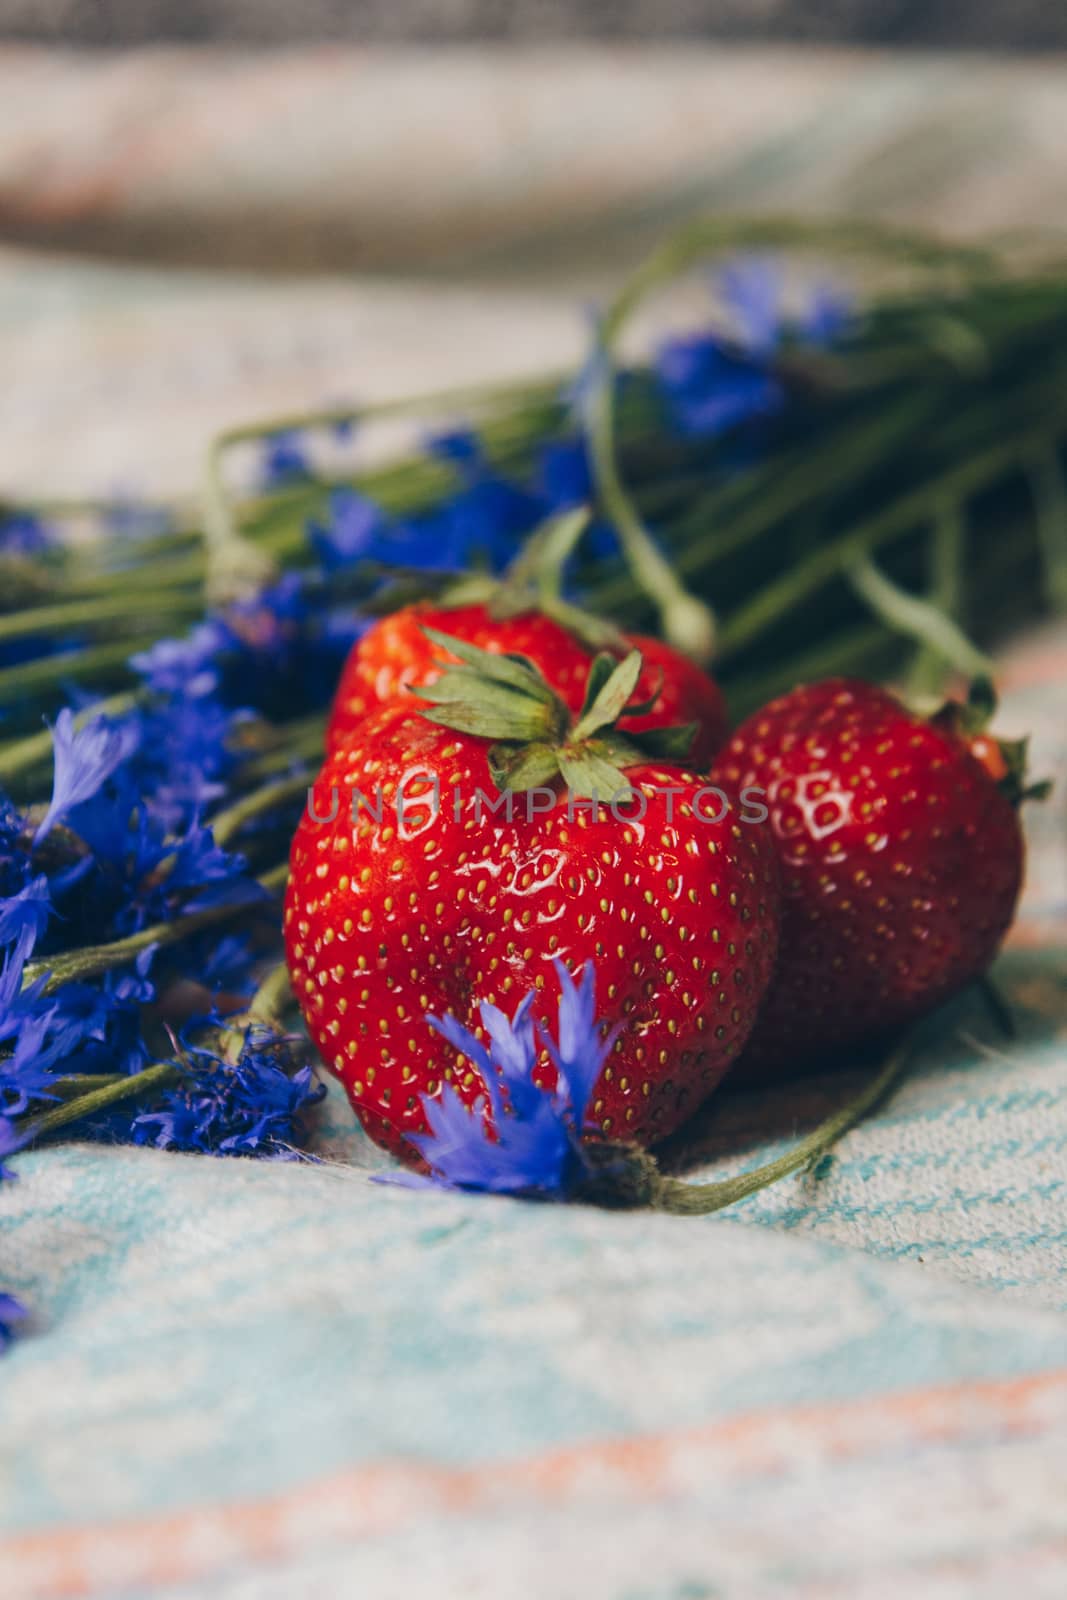 Seasonal summer flowers blue cornflowers and fruits strawberries on a napkin close-up conceptual background by yulaphotographer